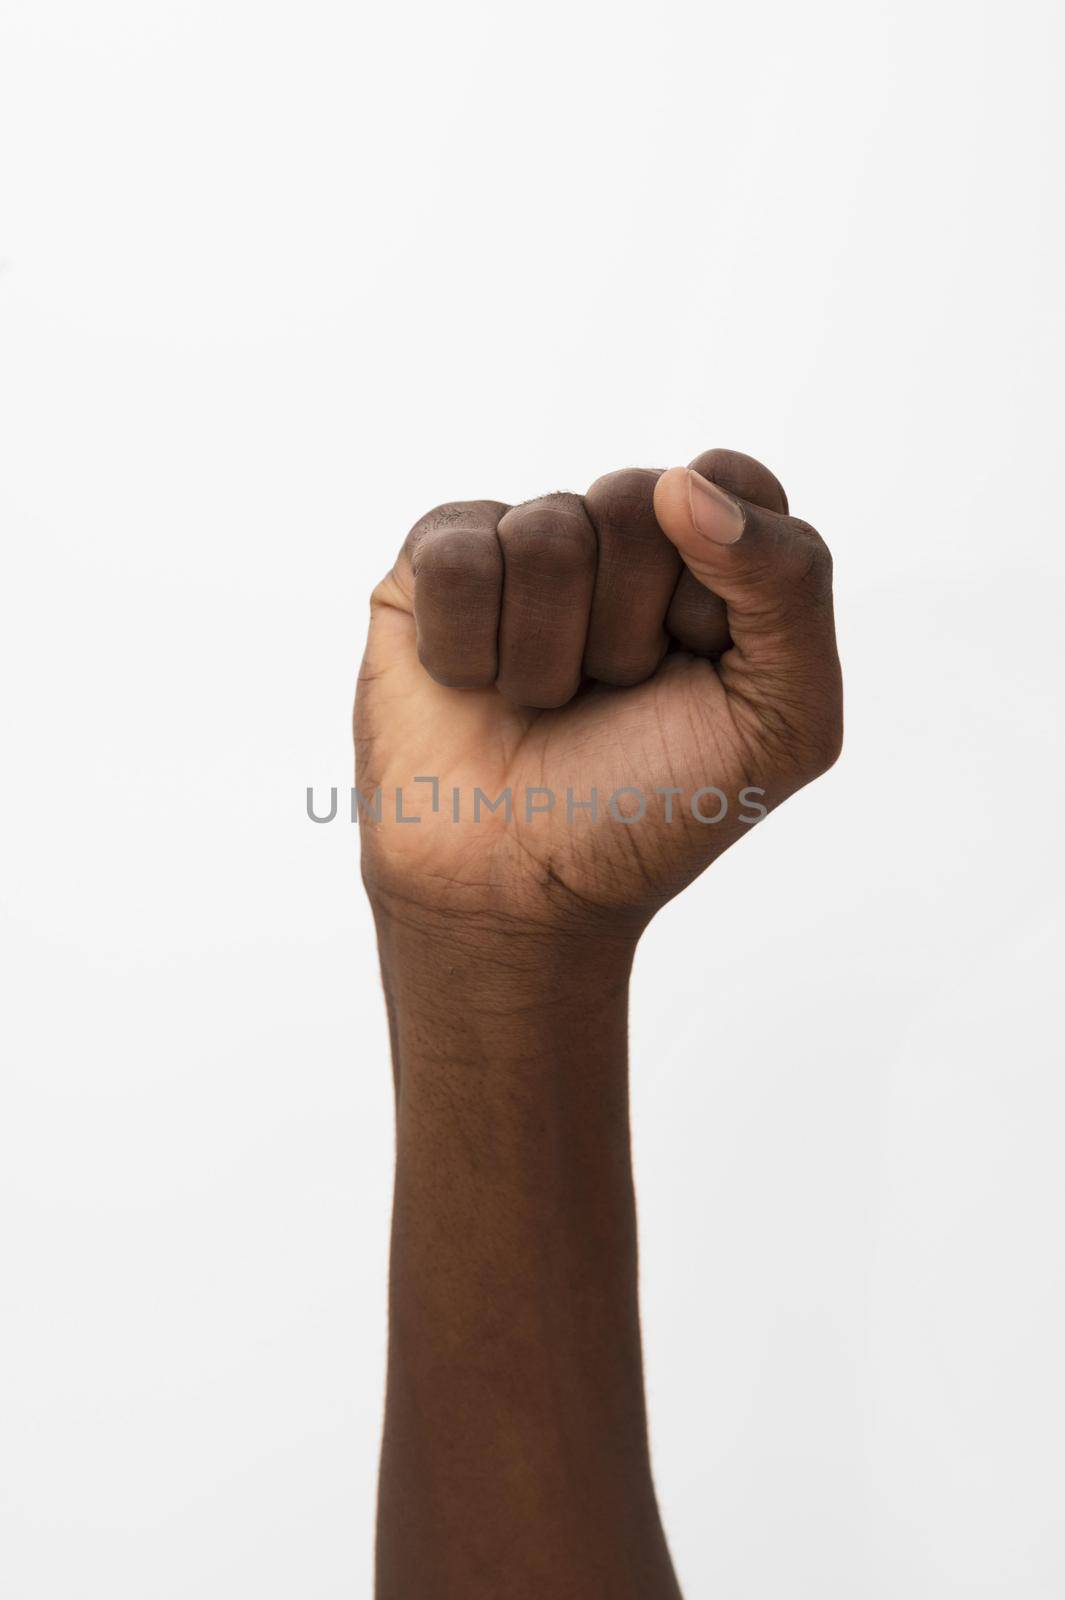 black person holding their fist up by Zahard